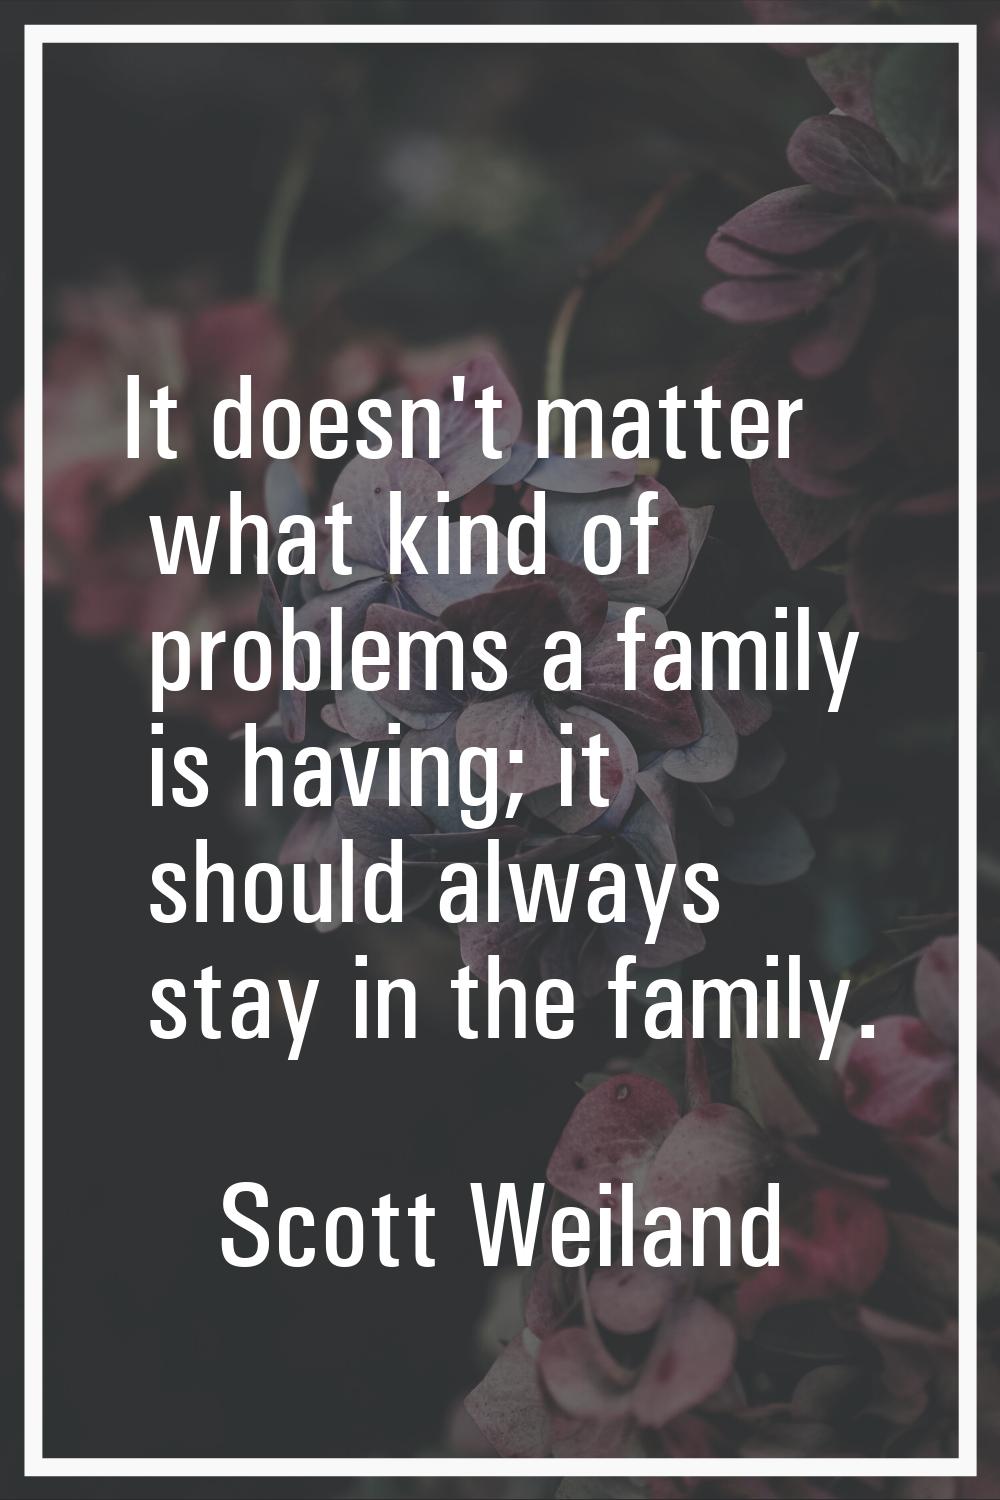 It doesn't matter what kind of problems a family is having; it should always stay in the family.